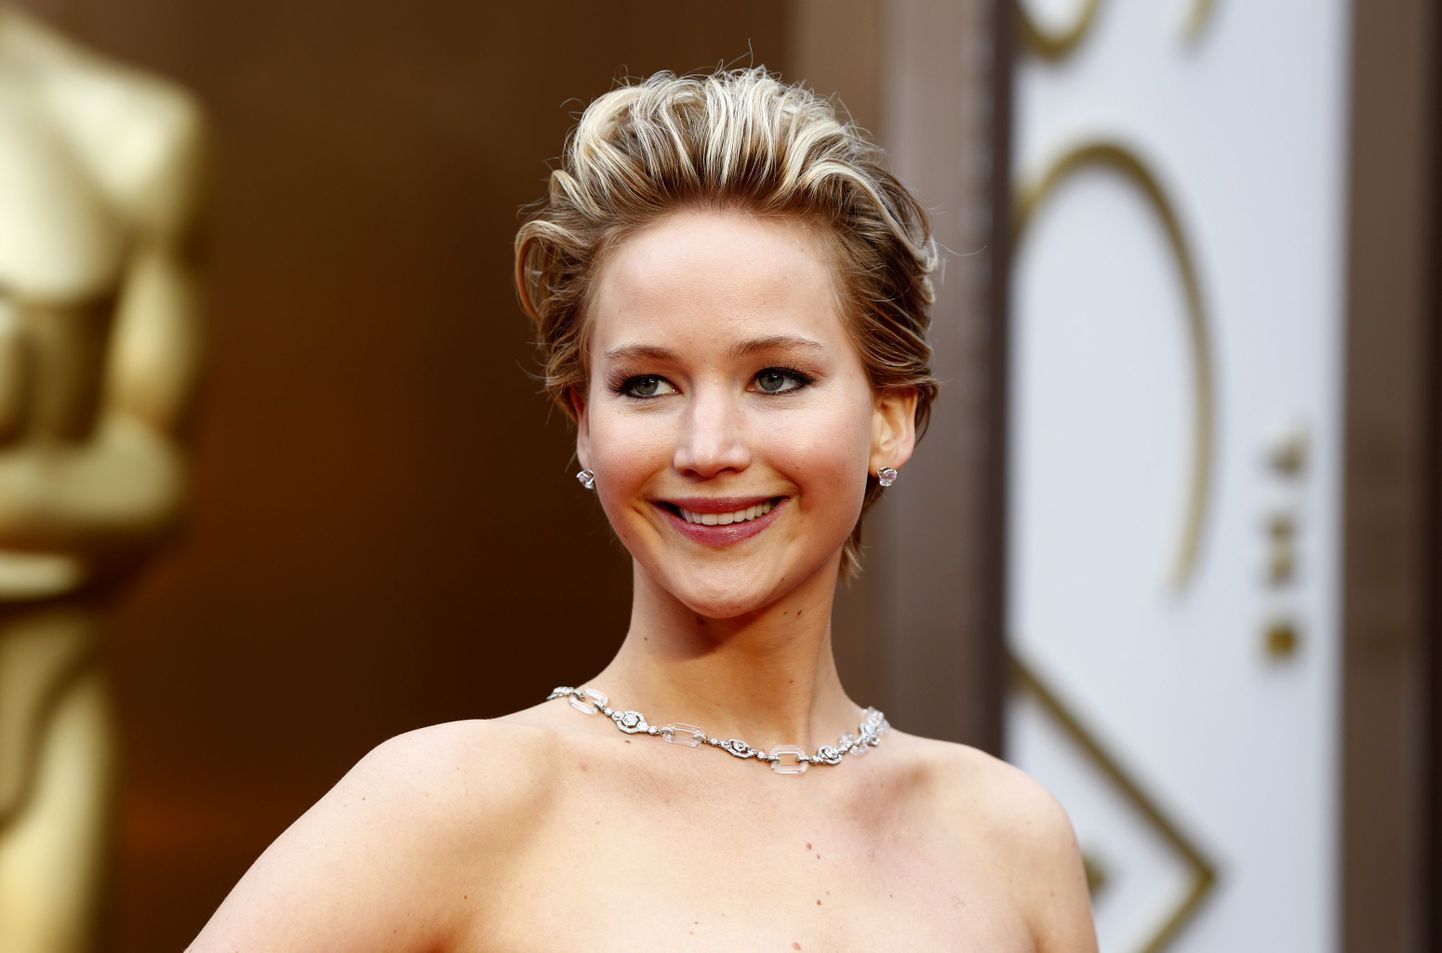 Jennifer Lawrence, best supporting actress nominee for her role in "American Hustle," arrives at the 86th Academy Awards in Hollywood, California March 2, 2014.    REUTERS/Lucas Jackson (UNITED STATES  - Tags: ENTERTAINMENT)  (OSCARS-ARRIVALS)